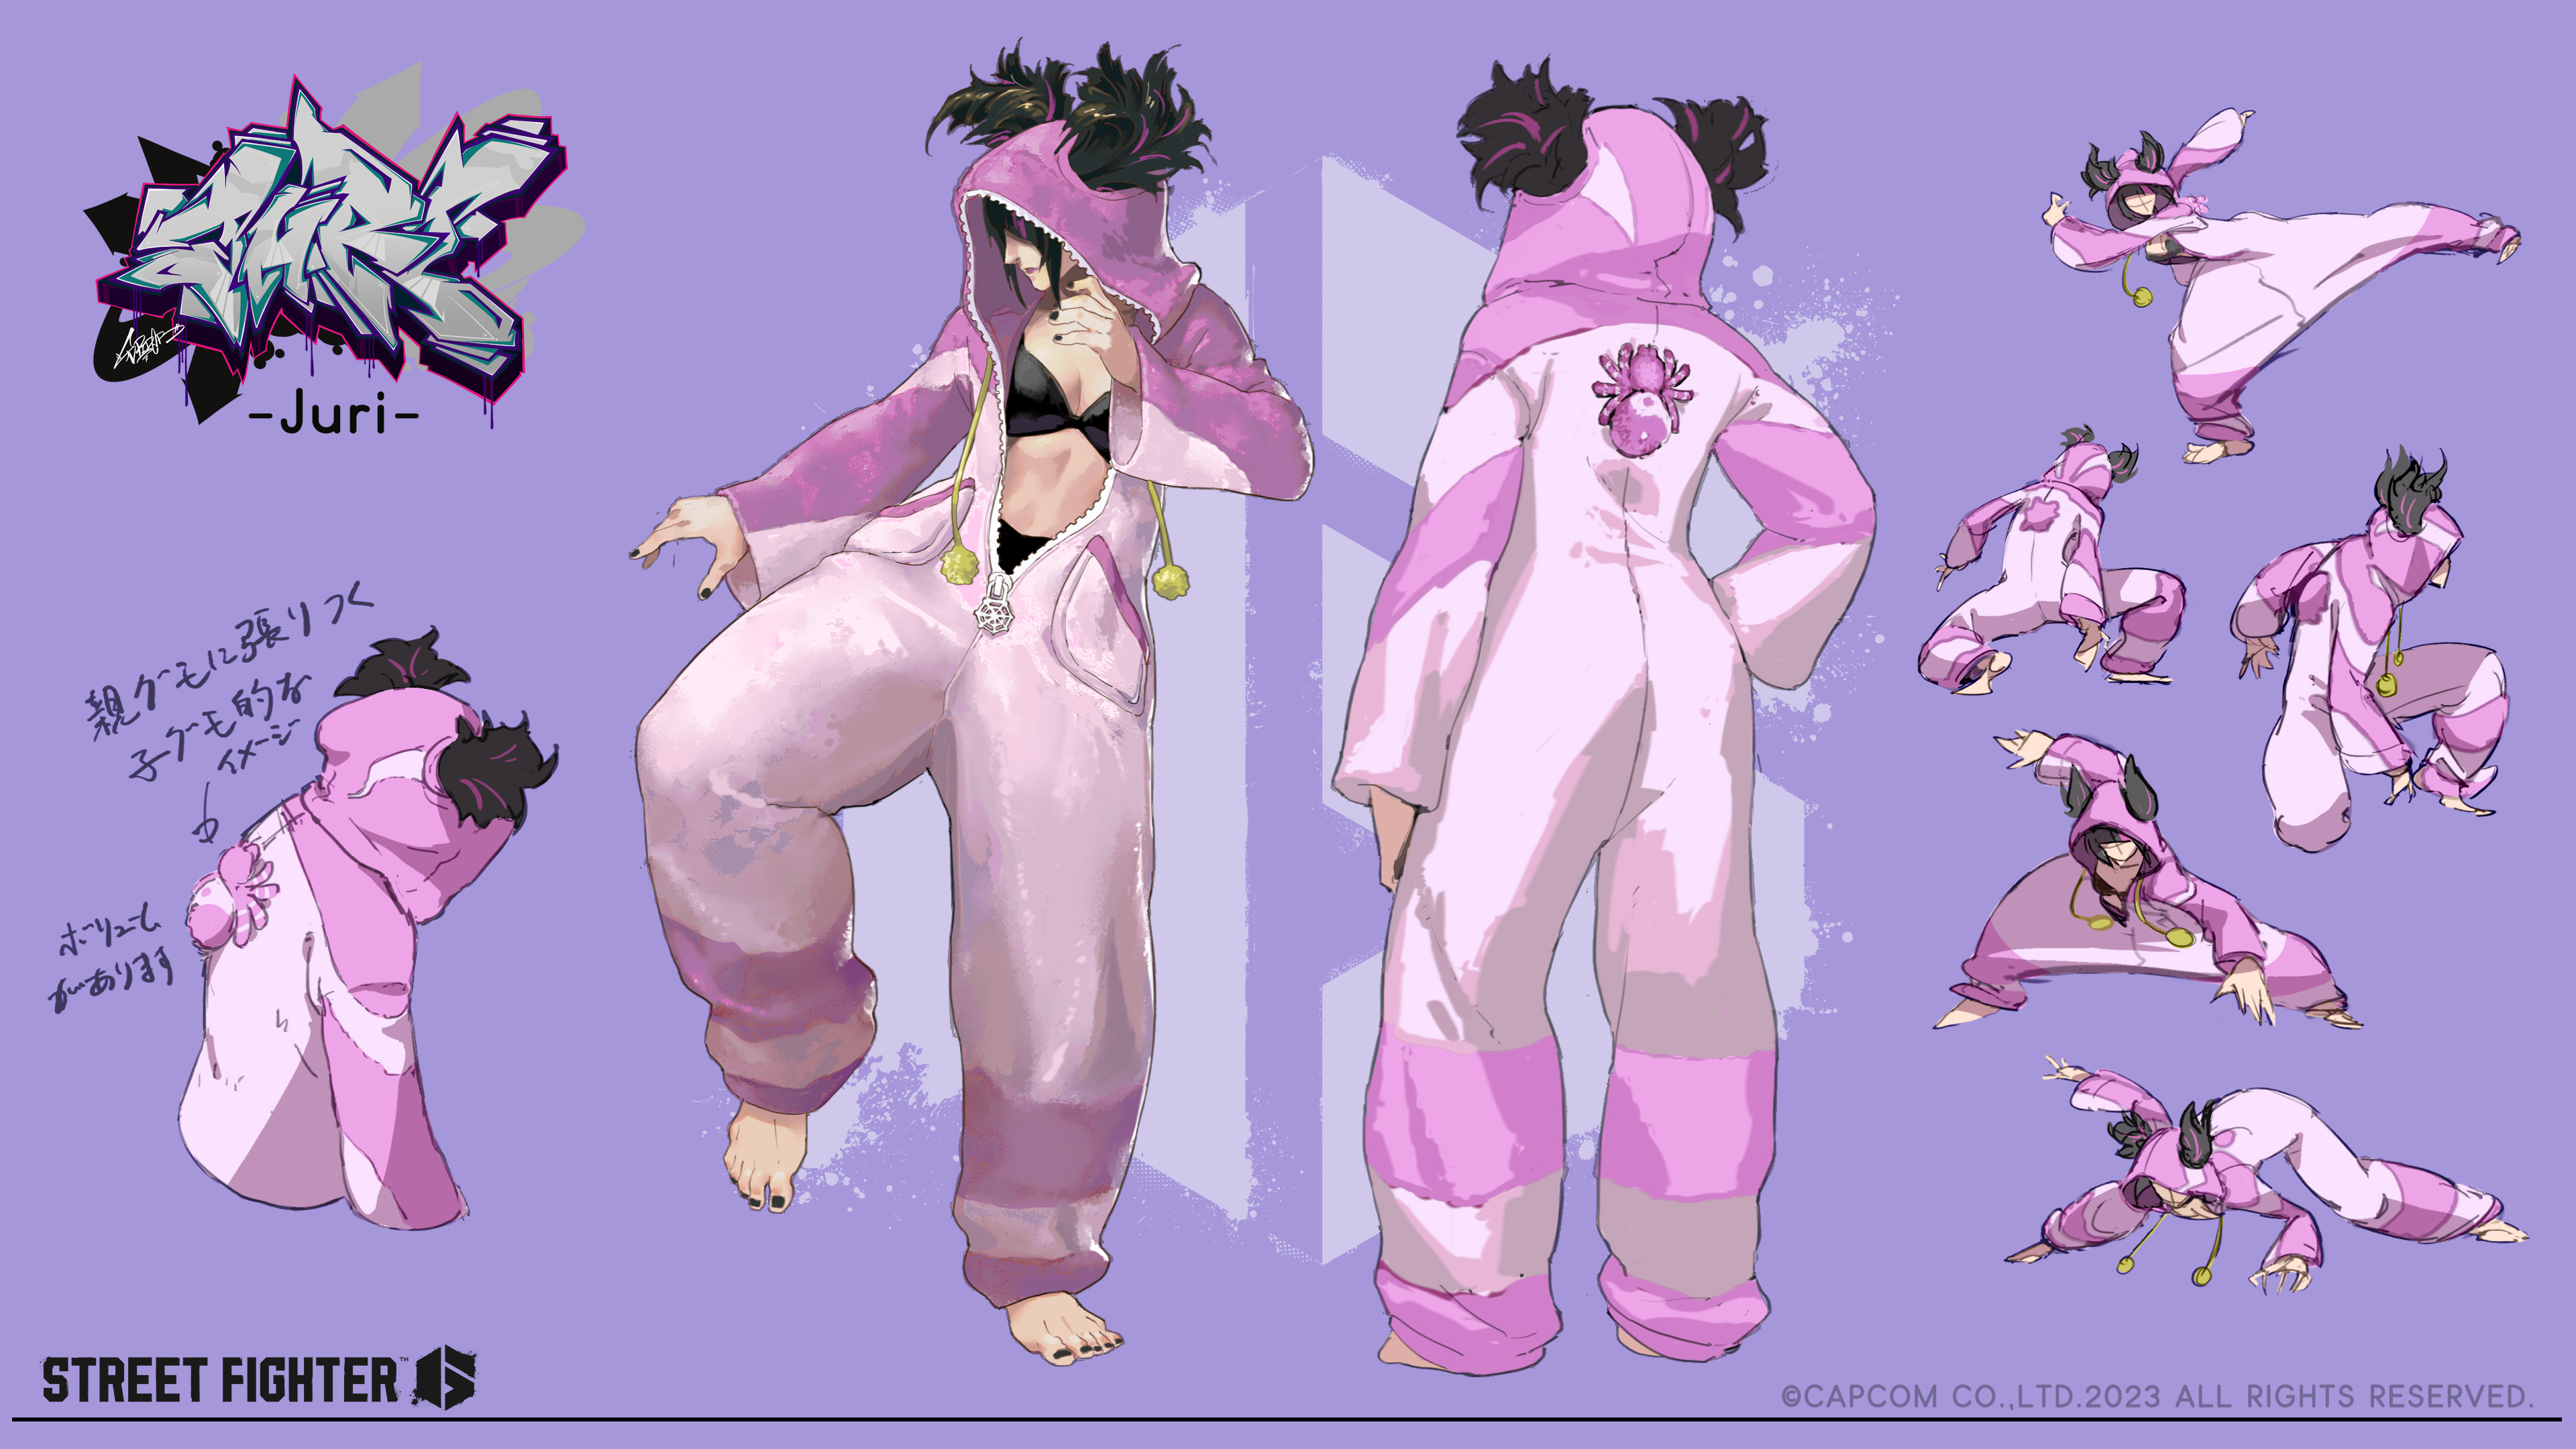 Street Fighter 6 Costumes Put Juri in Pajamas and Marisa in a Wedding Dress